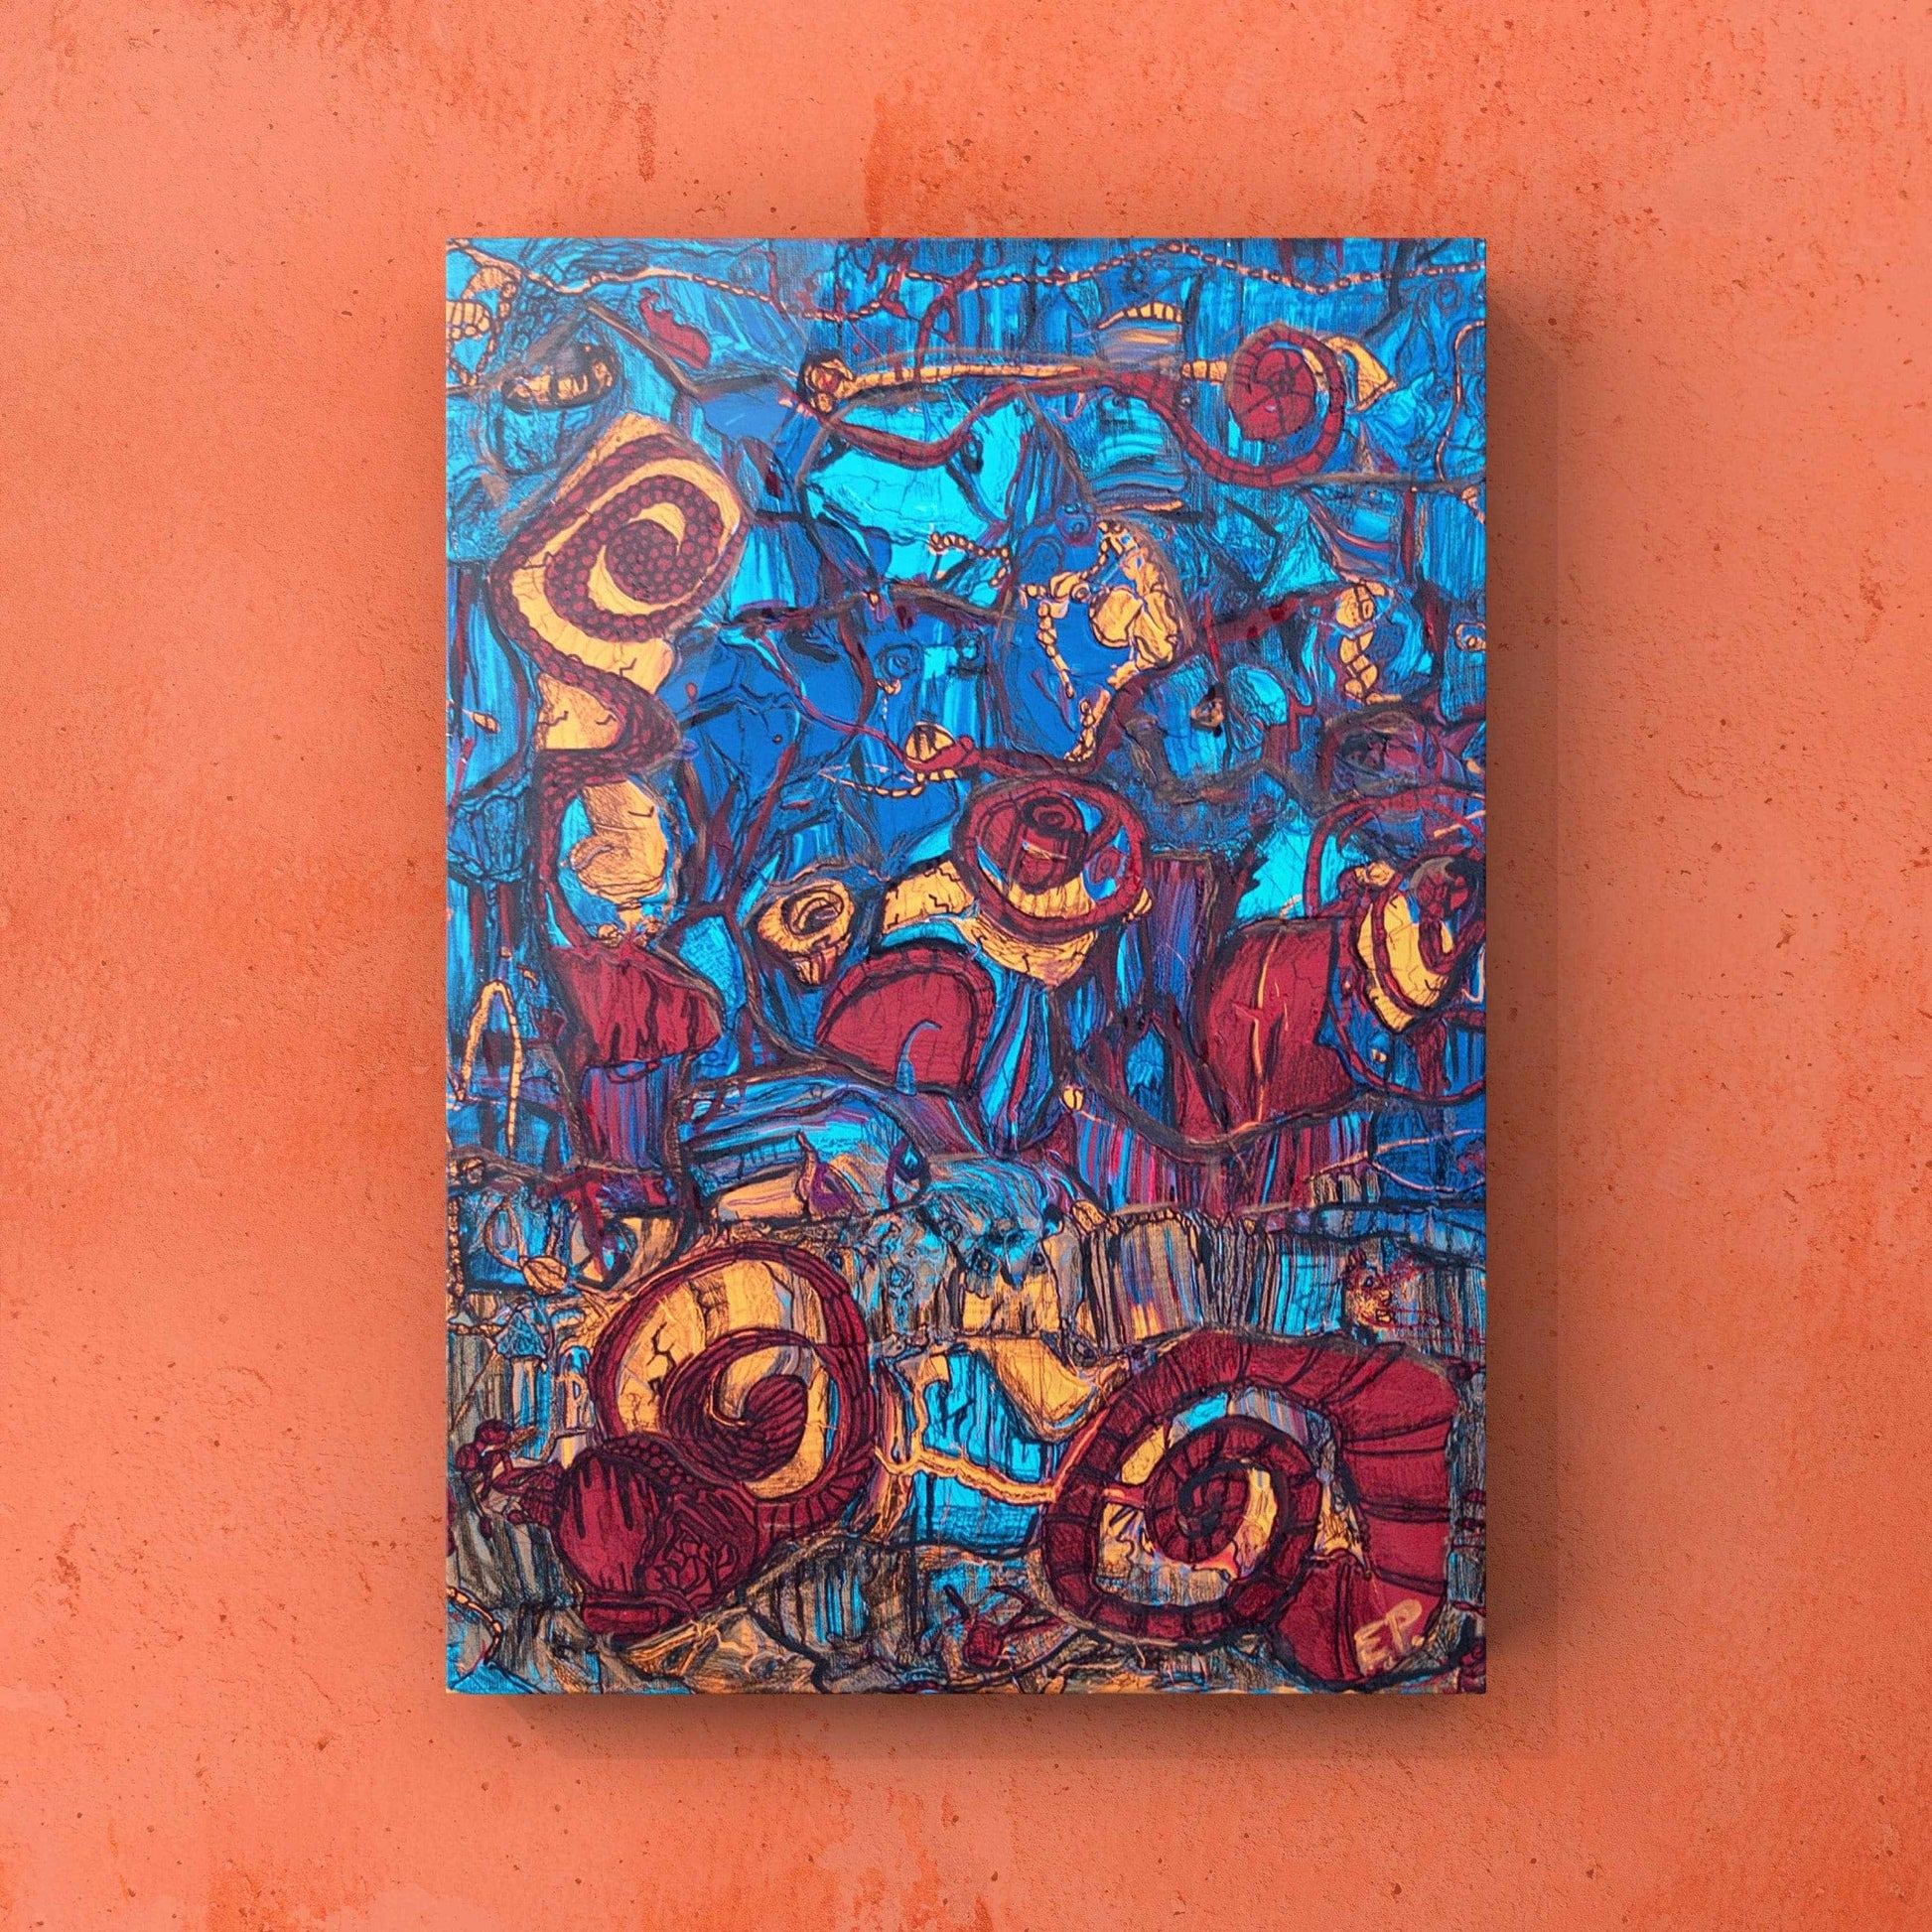 The Invasion - Medium Size, Bright And Colorful, Textured, Alien/Extraterrestrials Landing, Design Painting, by Art With Evie